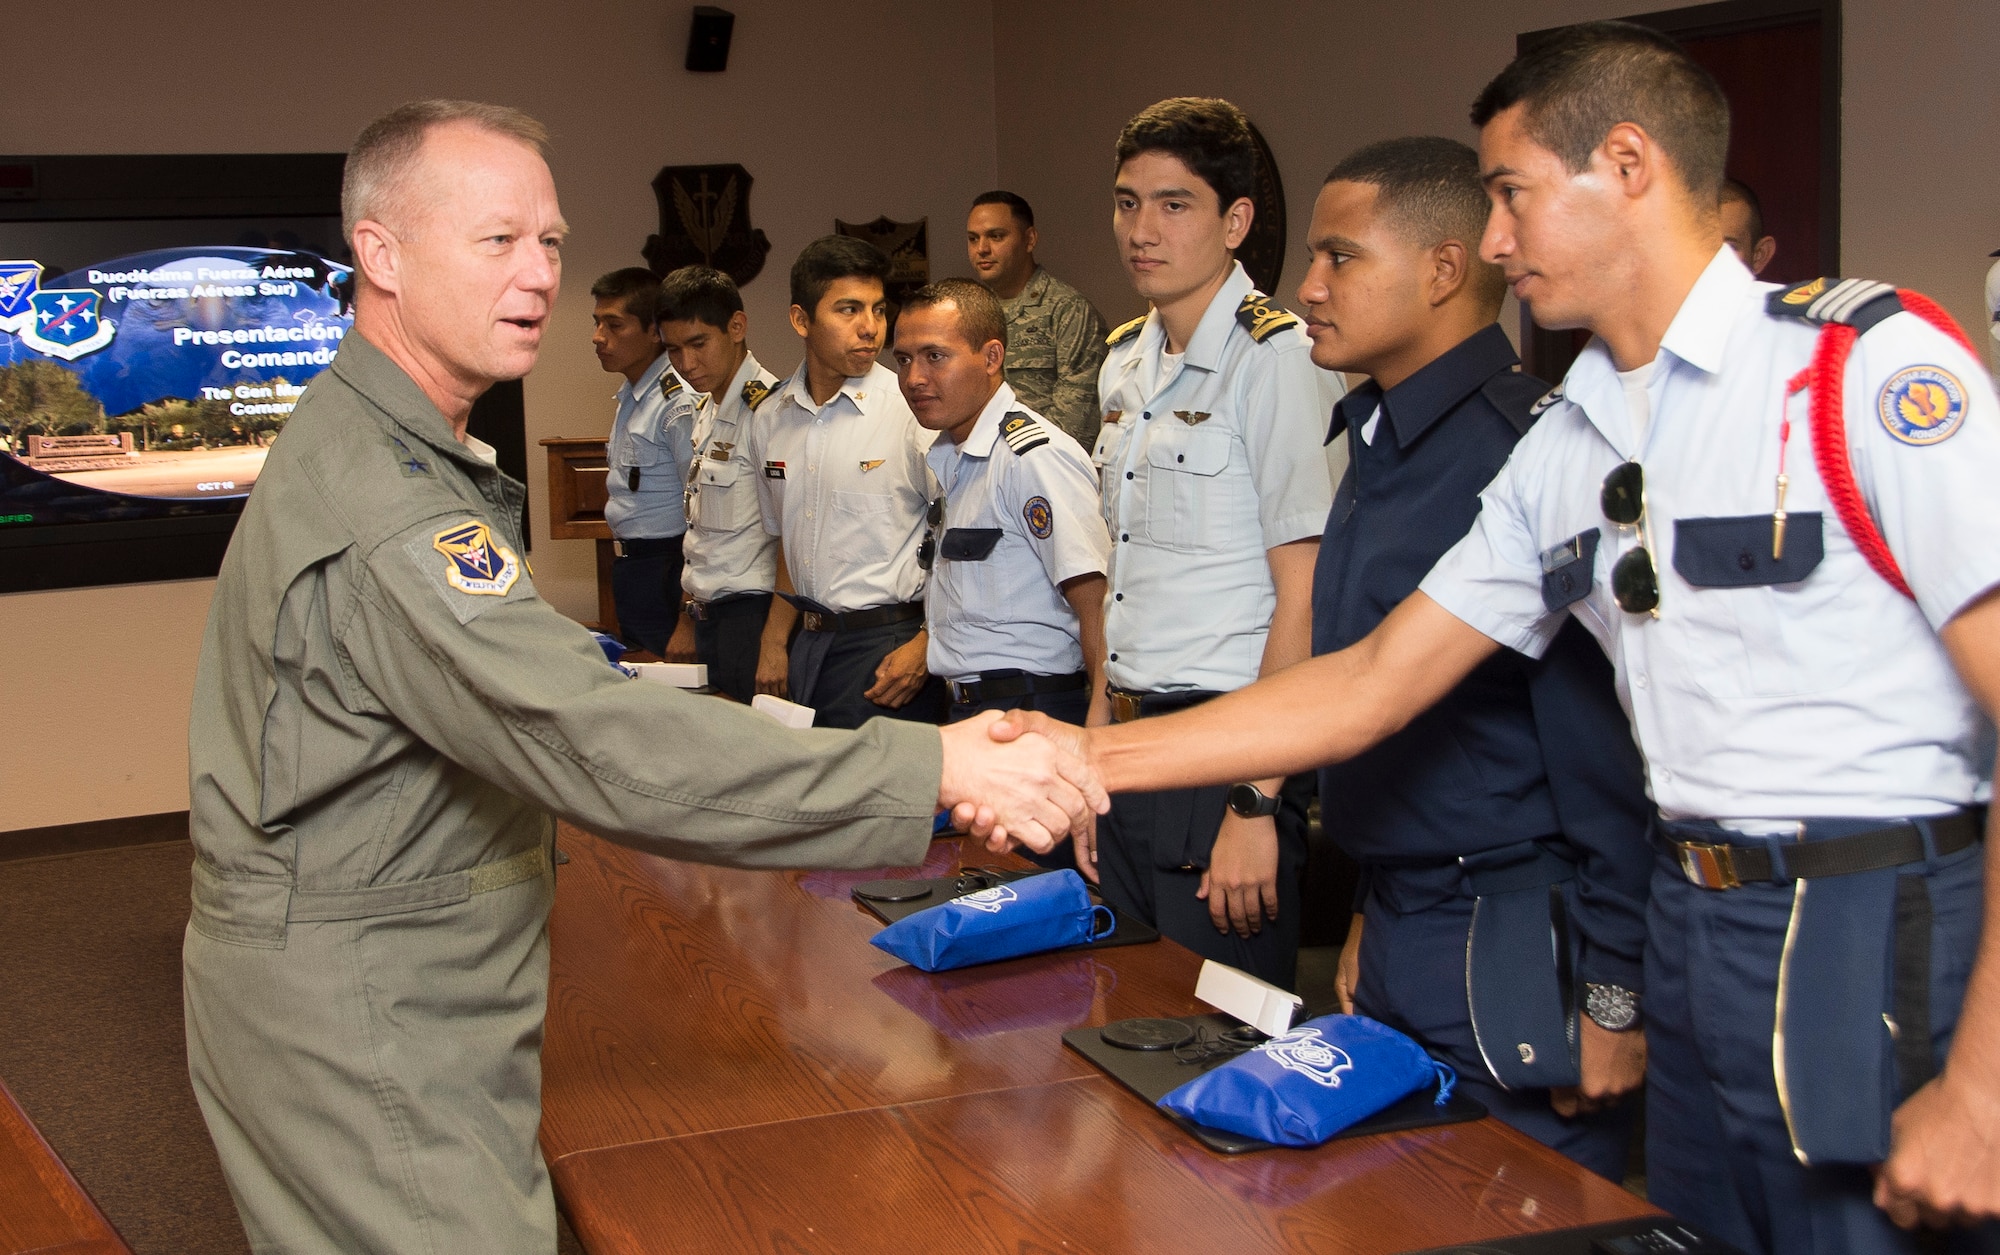 U.S. Air Force Lt. Gen. Mark Kelly, 12th Air Force (Air Forces Southern) commander, greets cadets from various academies throughout Latin America before a mission brief at Davis-Monthan Air Force Base, Ariz., Oct. 13, 2016. The cadets are visiting Davis-Monthan AFB as part of the Latin American Cadet Initiative, which allows the top two senior cadets from up to 15 Latin American air force academies to visit the U.S. for three weeks to familiarize them with the U.S. Air Force. (U.S. Air Force photo by Staff Sgt. Adam Grant)